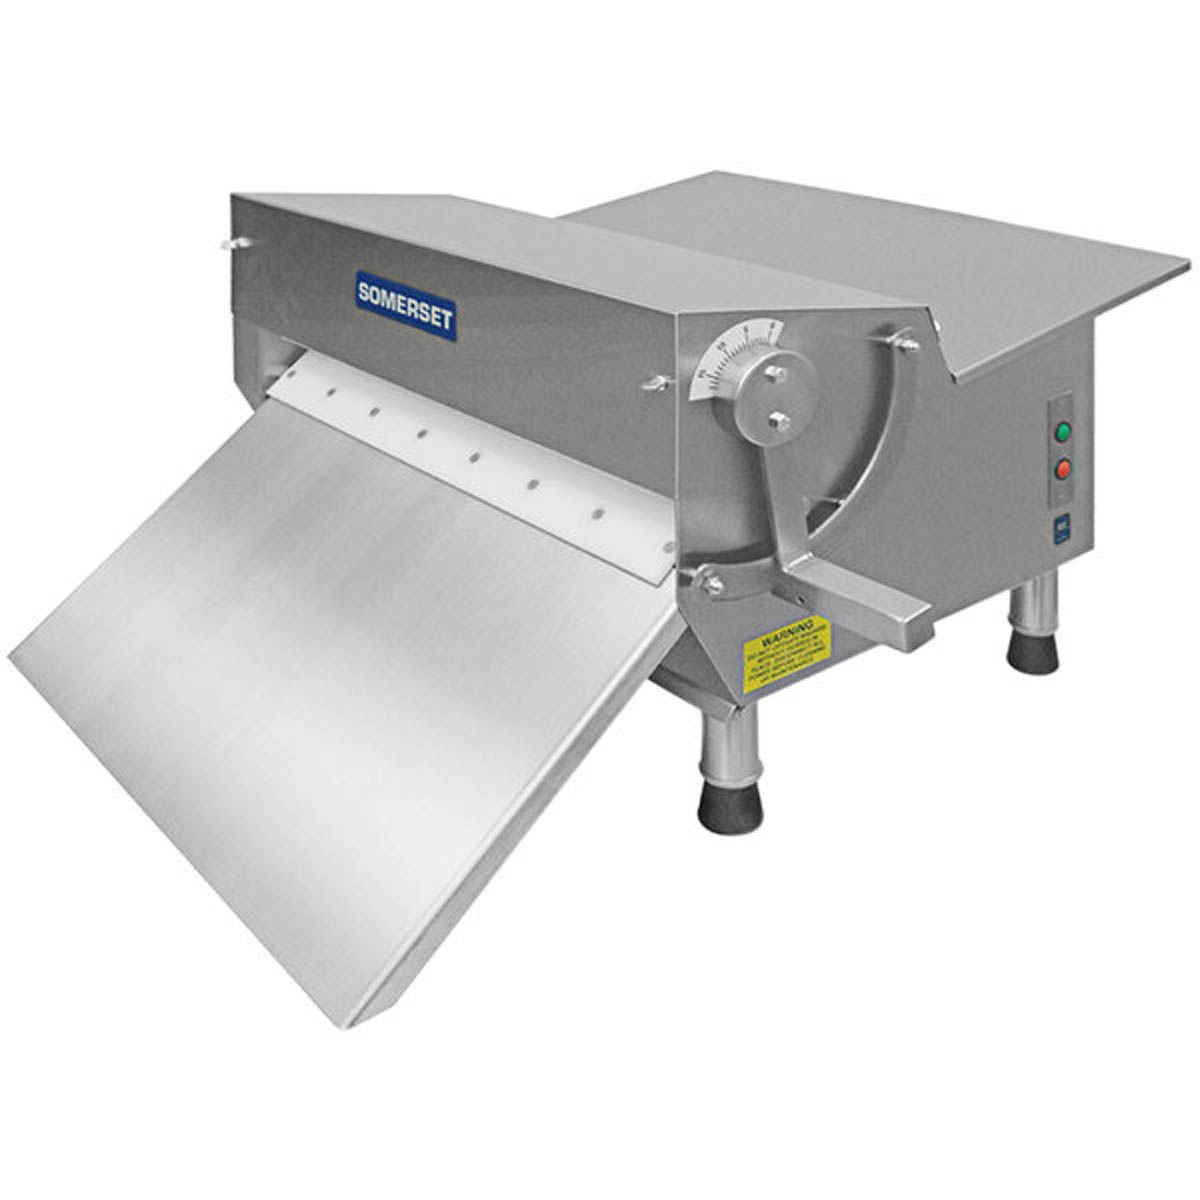 Somerset CDR-500F Countertop Dough/Fondant Sheeter with Tray, 20″ Synthetic Roller